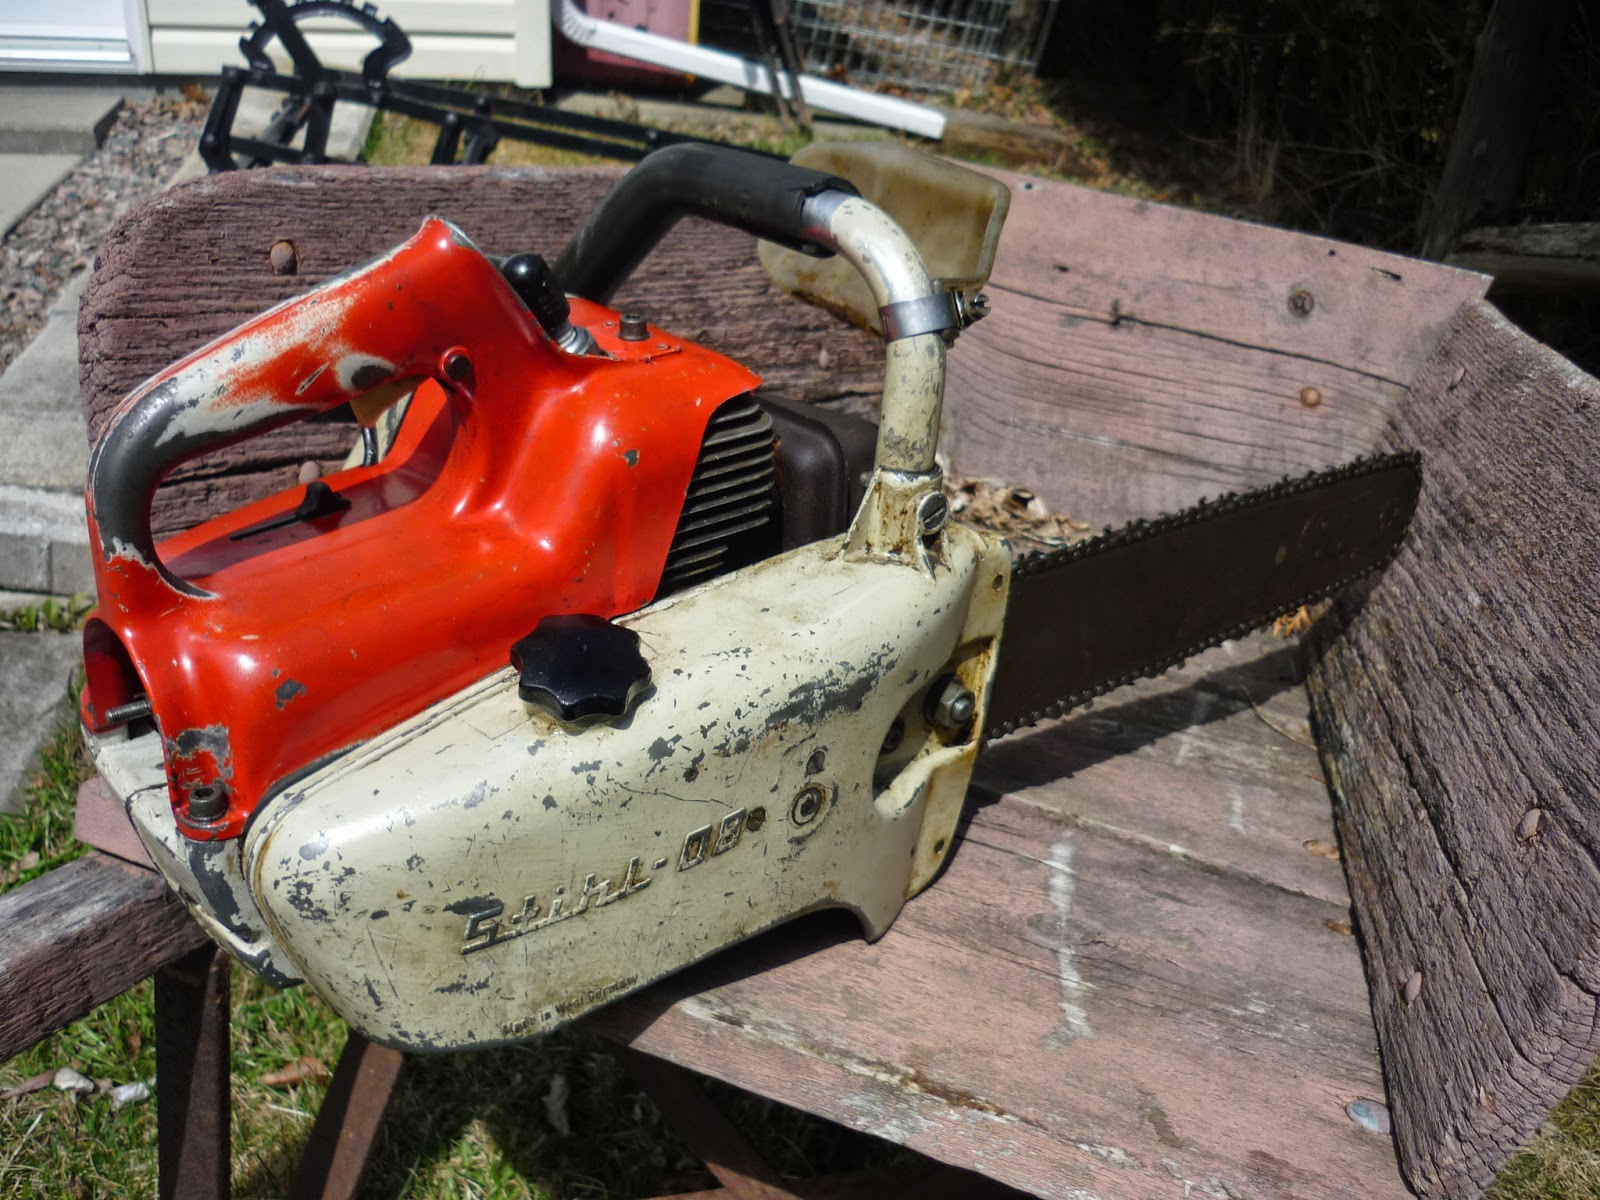 View Larger - Stihl Old Chainsaw , HD Wallpaper & Backgrounds